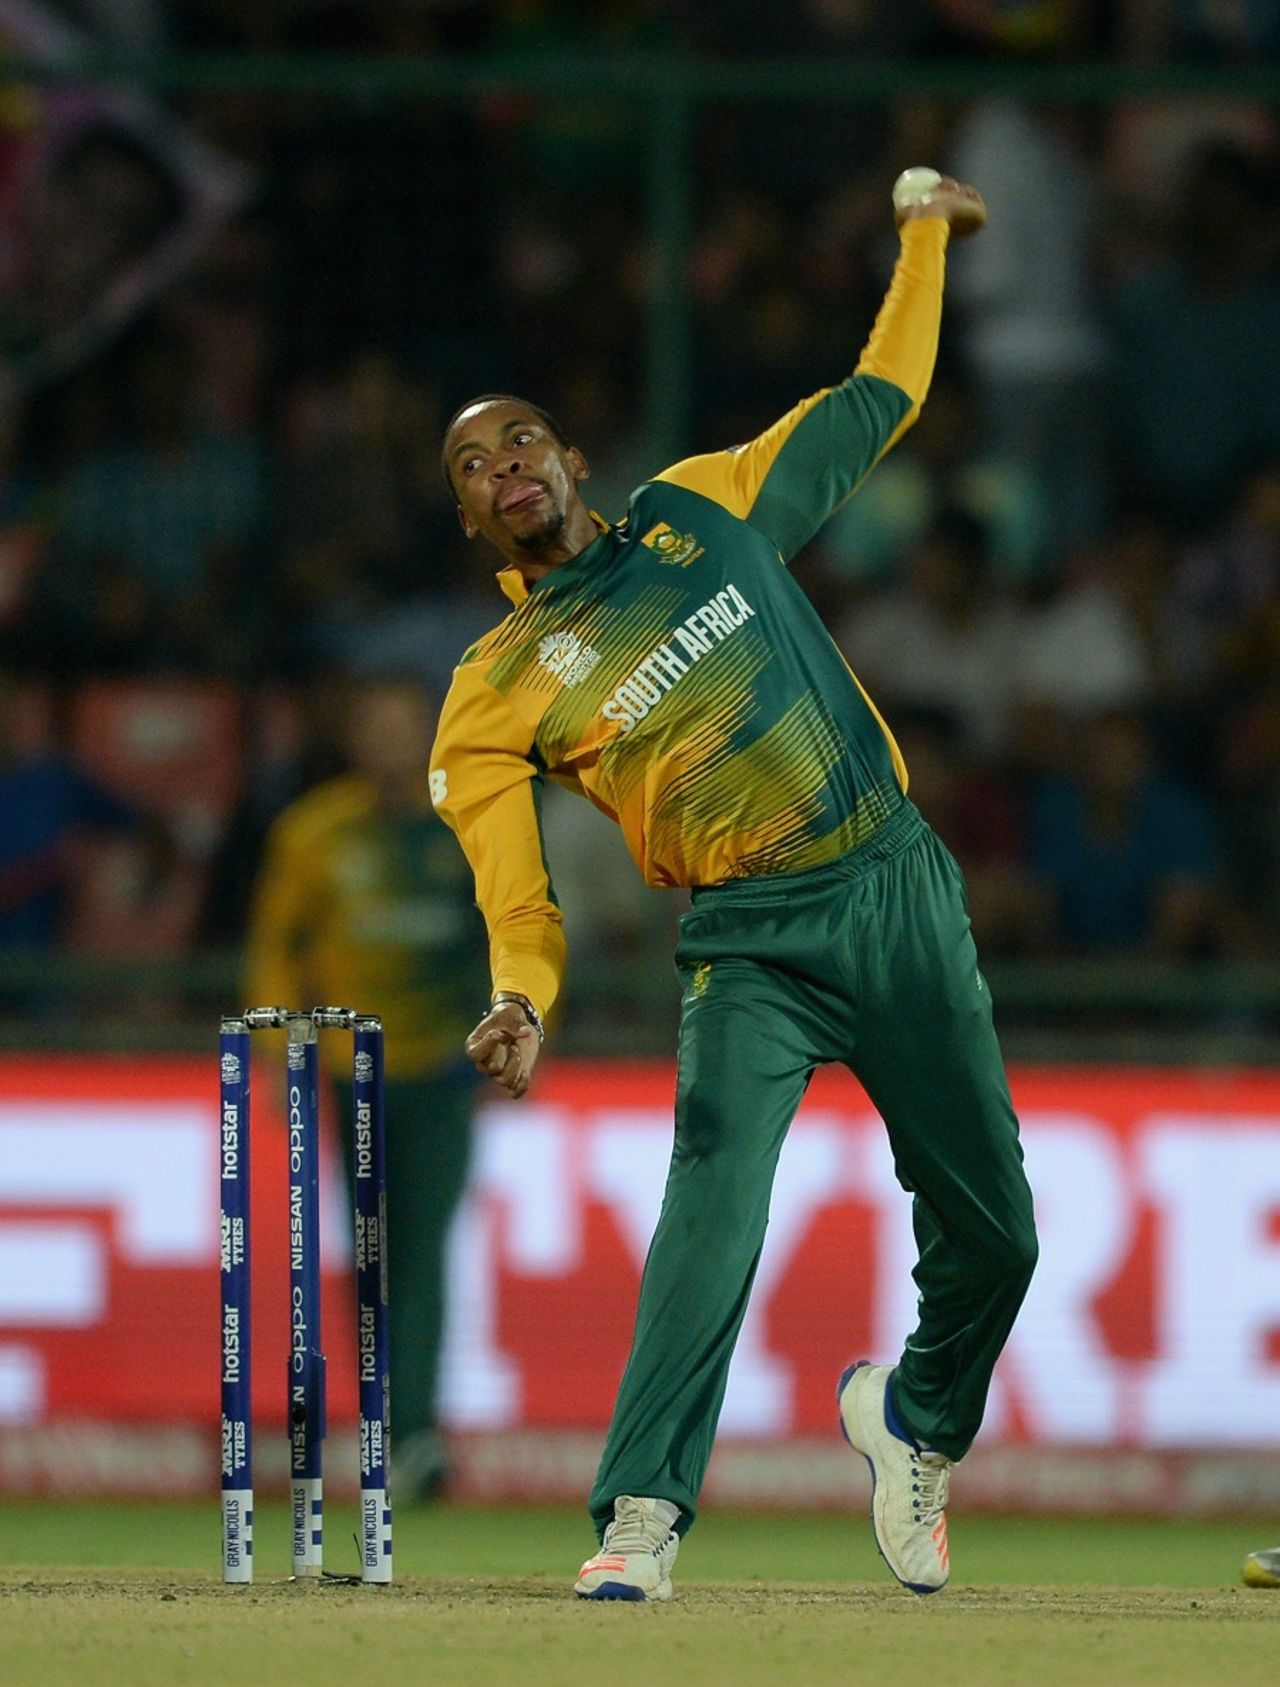 Aaron Phangiso in his delivery stride, South Africa v Sri Lanka, World T20 2016, Group 1, Delhi, March 28, 2016